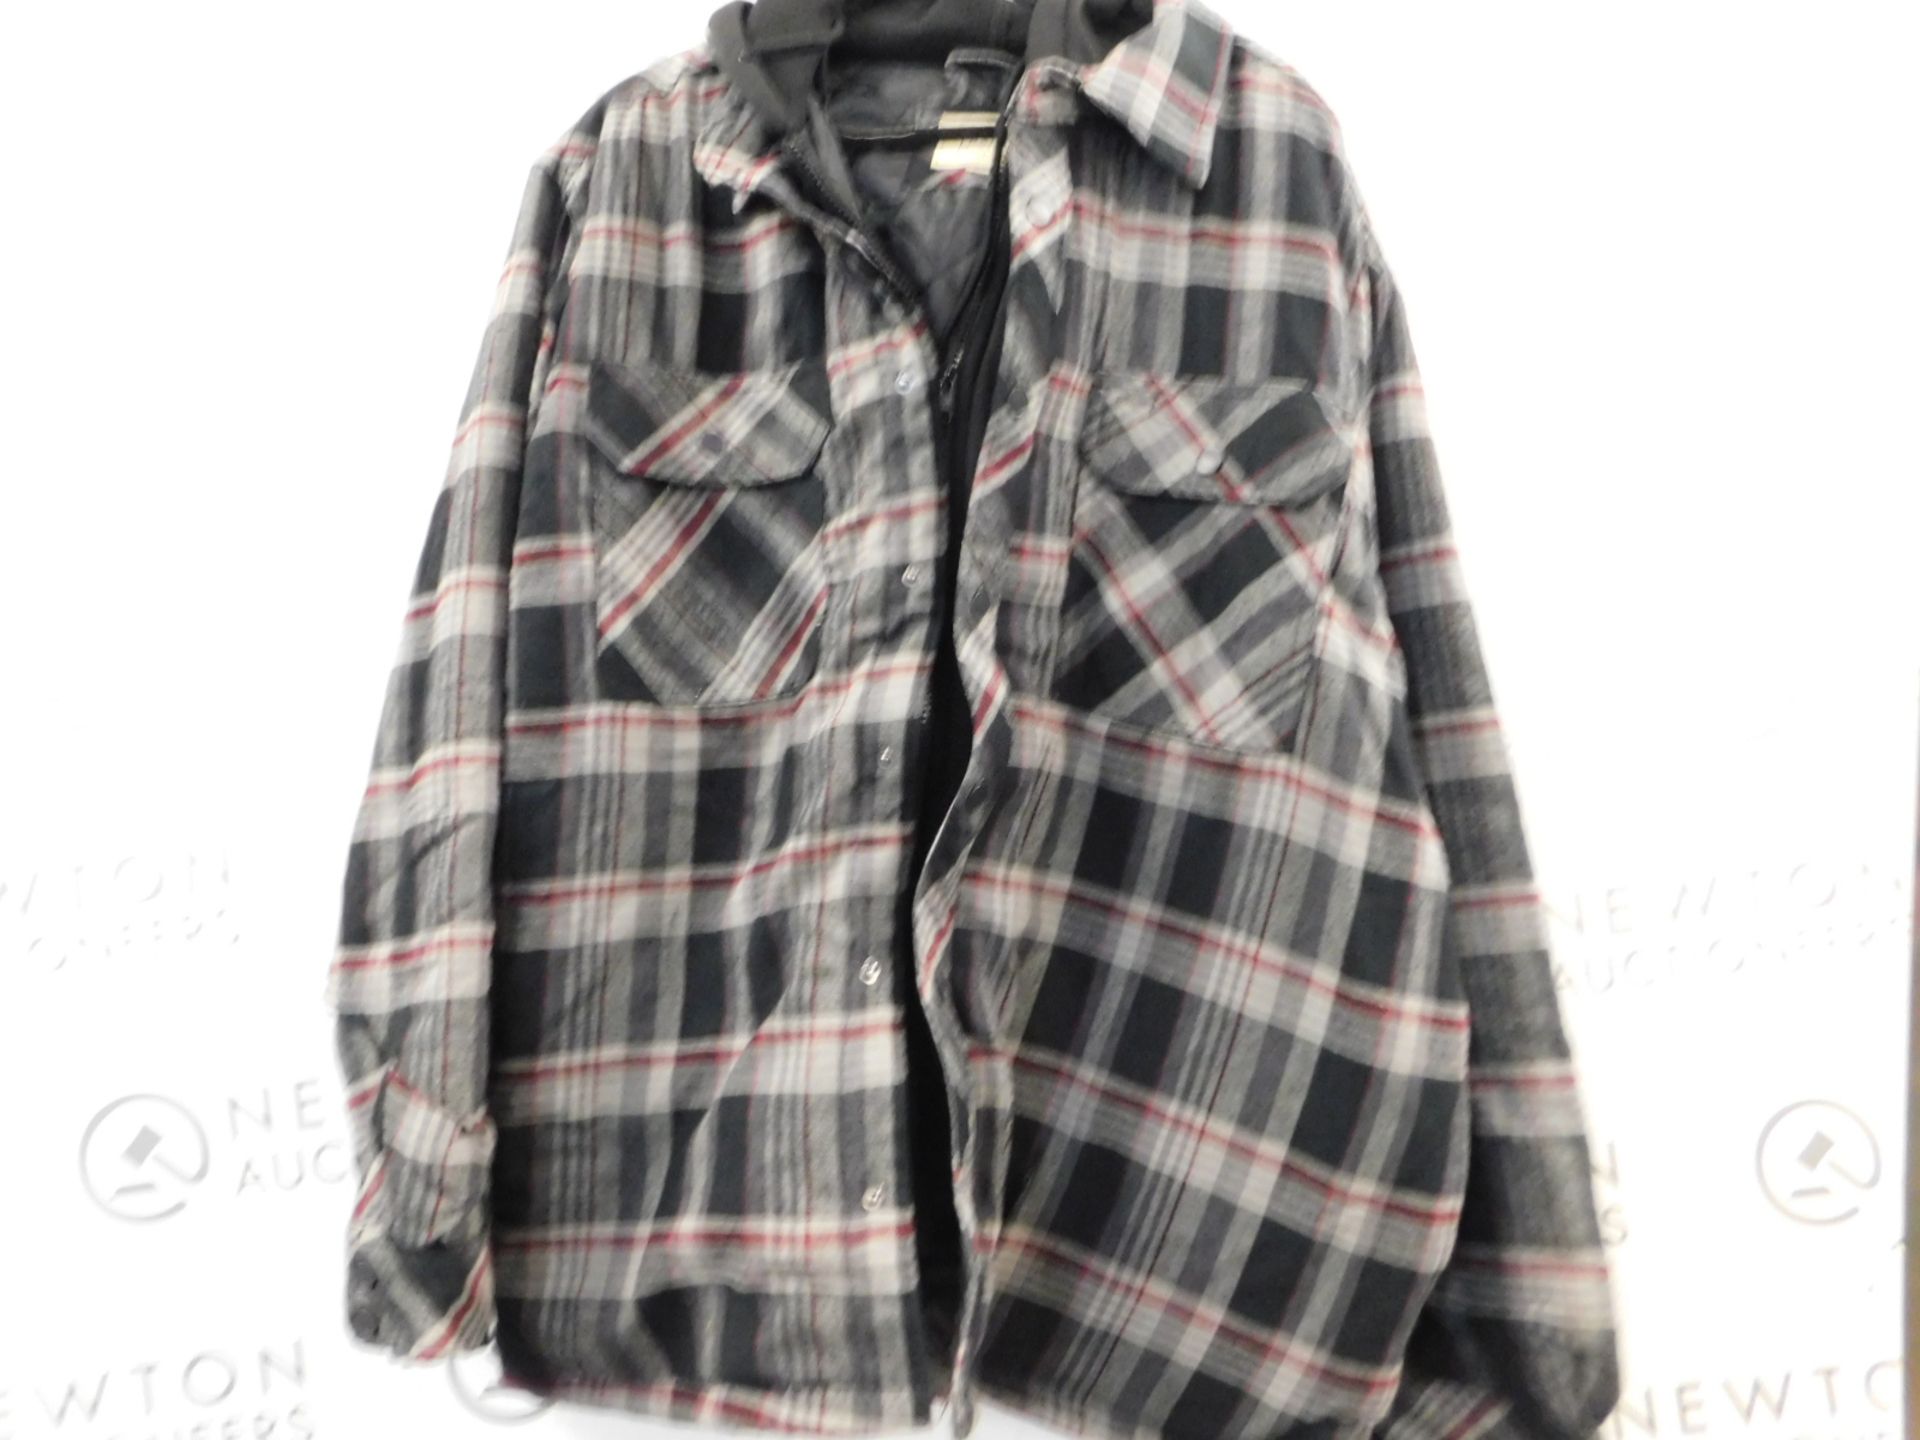 1 BOSTON TRADERS MENS HOODED FLANNEL SHIRT/ JACKET SIZE XXL RRP Â£39.99